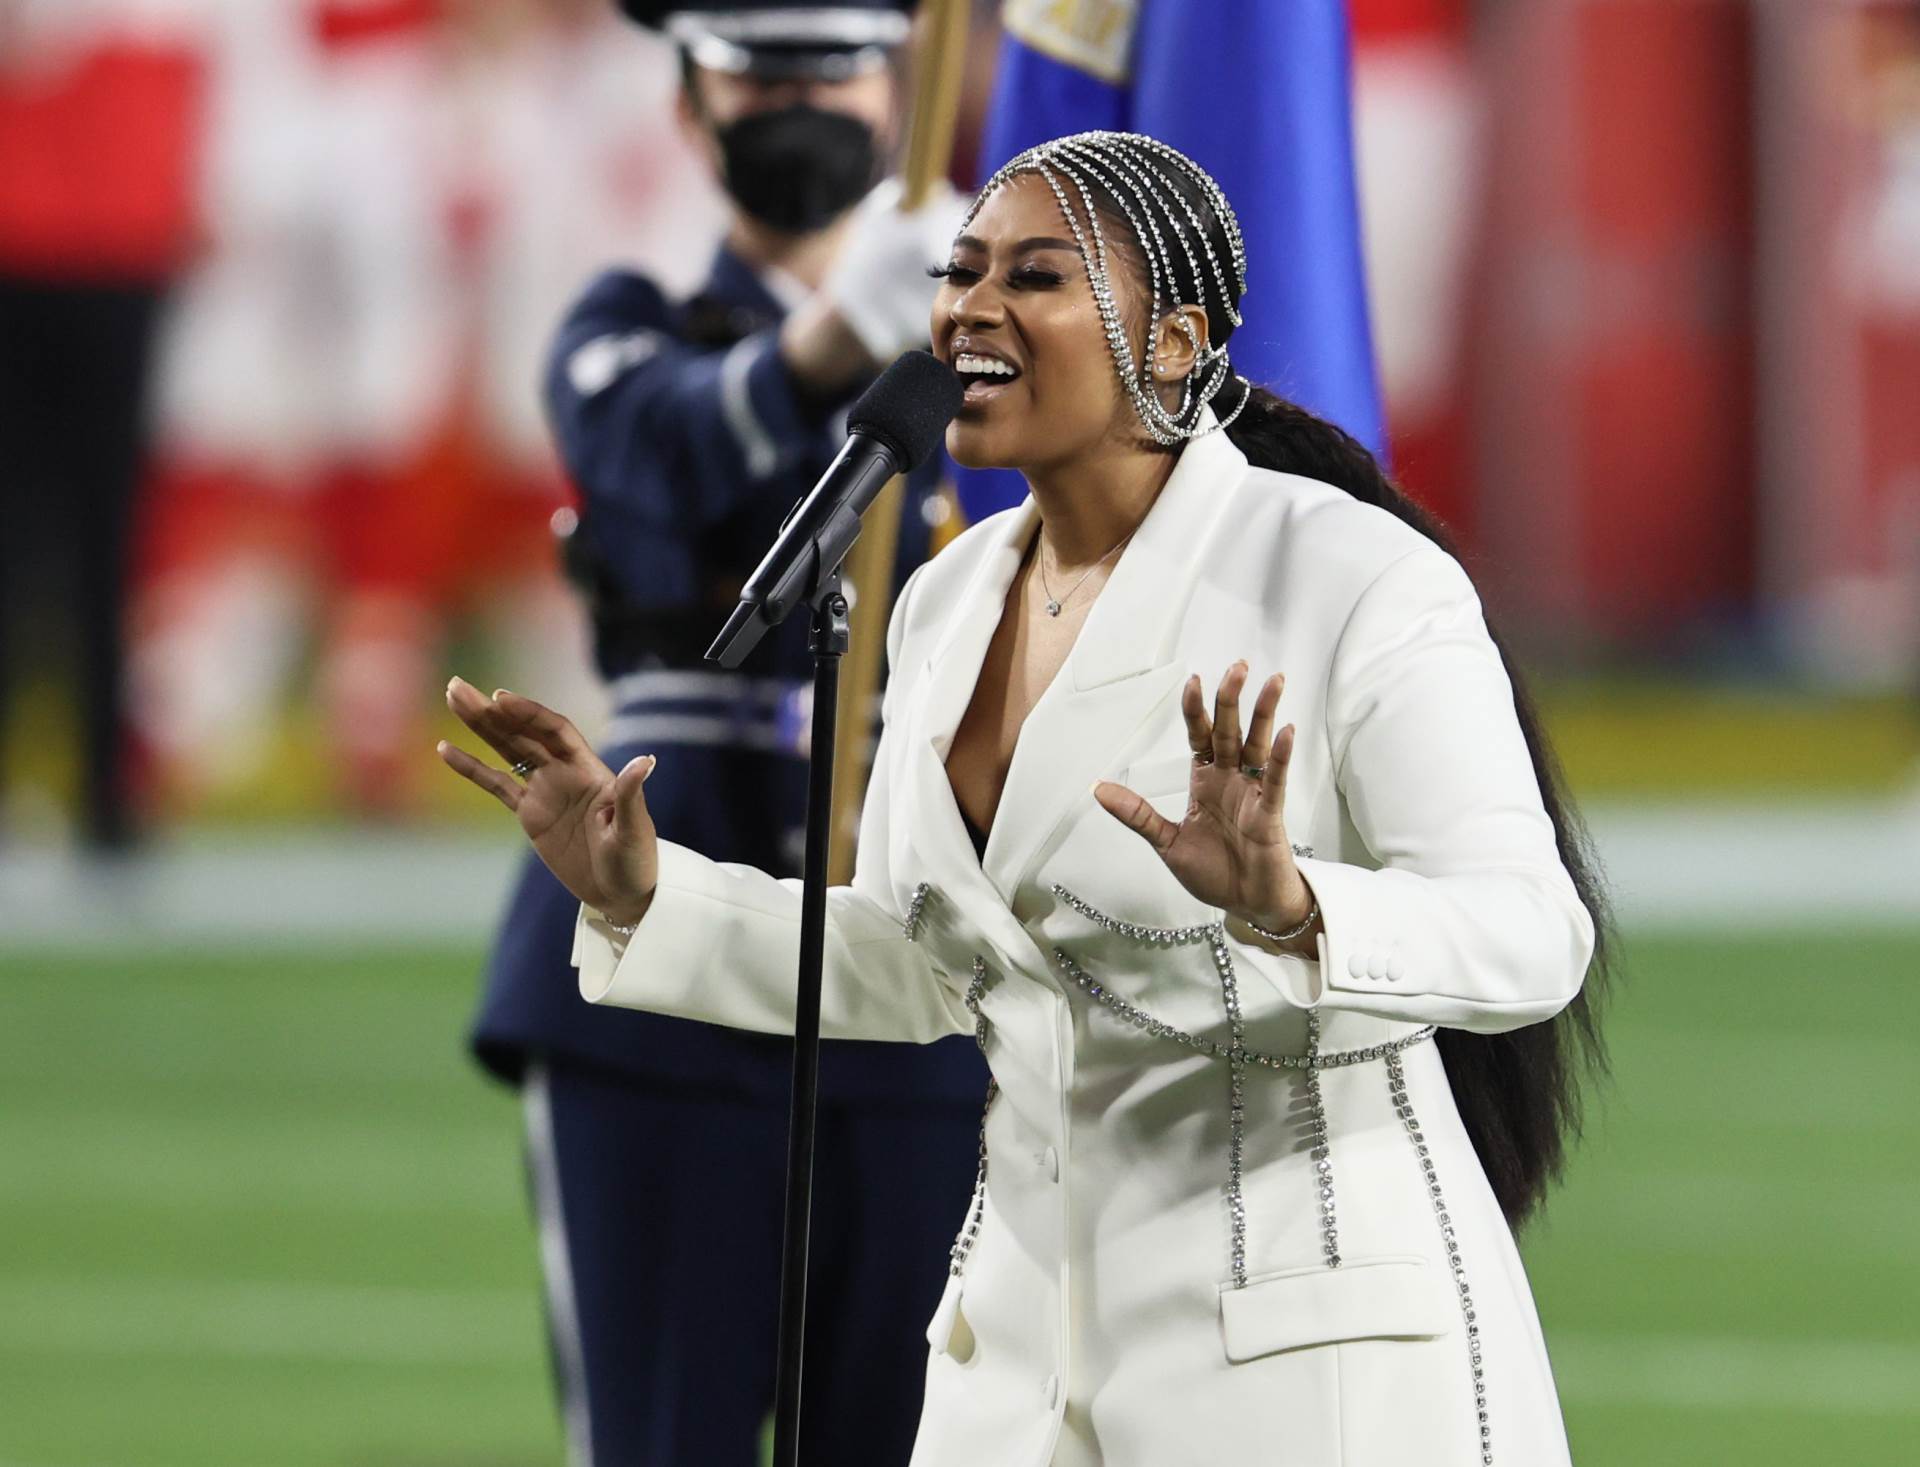  Feb 7, 2021; Tampa, FL, USA; Recording artist Jazmine Sullivan performs the national anthem before Super Bowl LV between the Tampa Bay Buccaneers and the Kansas City Chiefs at Raymond James Stadium.,Image: 589497318, License: Rights-managed, Restrictions: *** World Rights ***, Model Release: no, Credit line: USA TODAY Network / ddp USA / Profimedia 